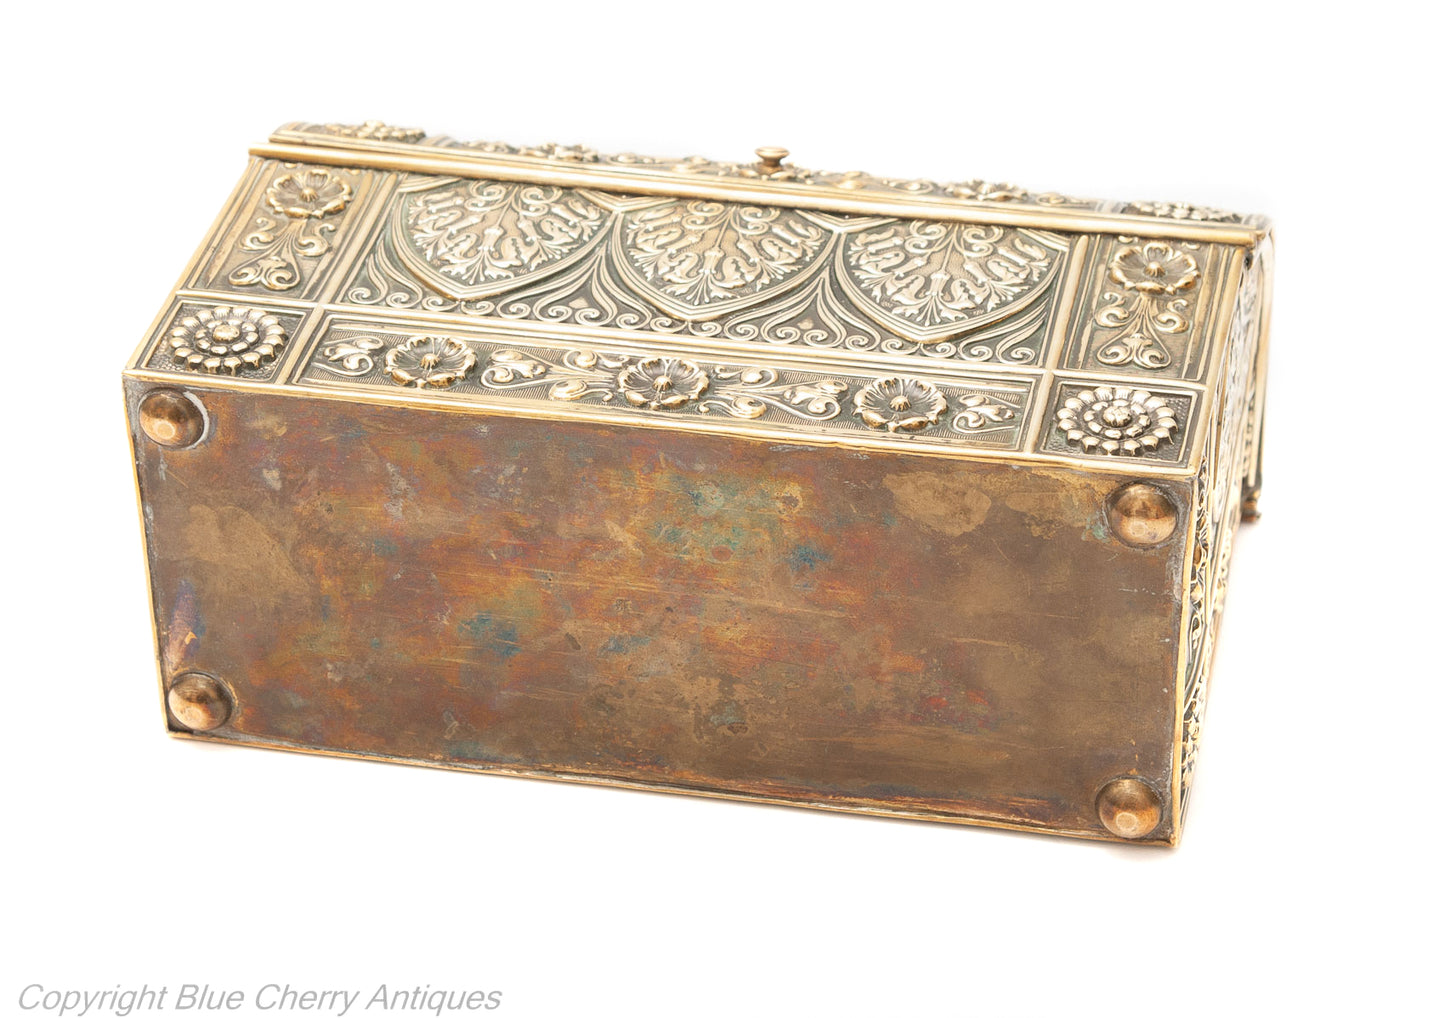 Antique Embossed Brass Cased Desk Type Stationery or Small Letter Box c1880 (Code 1772)